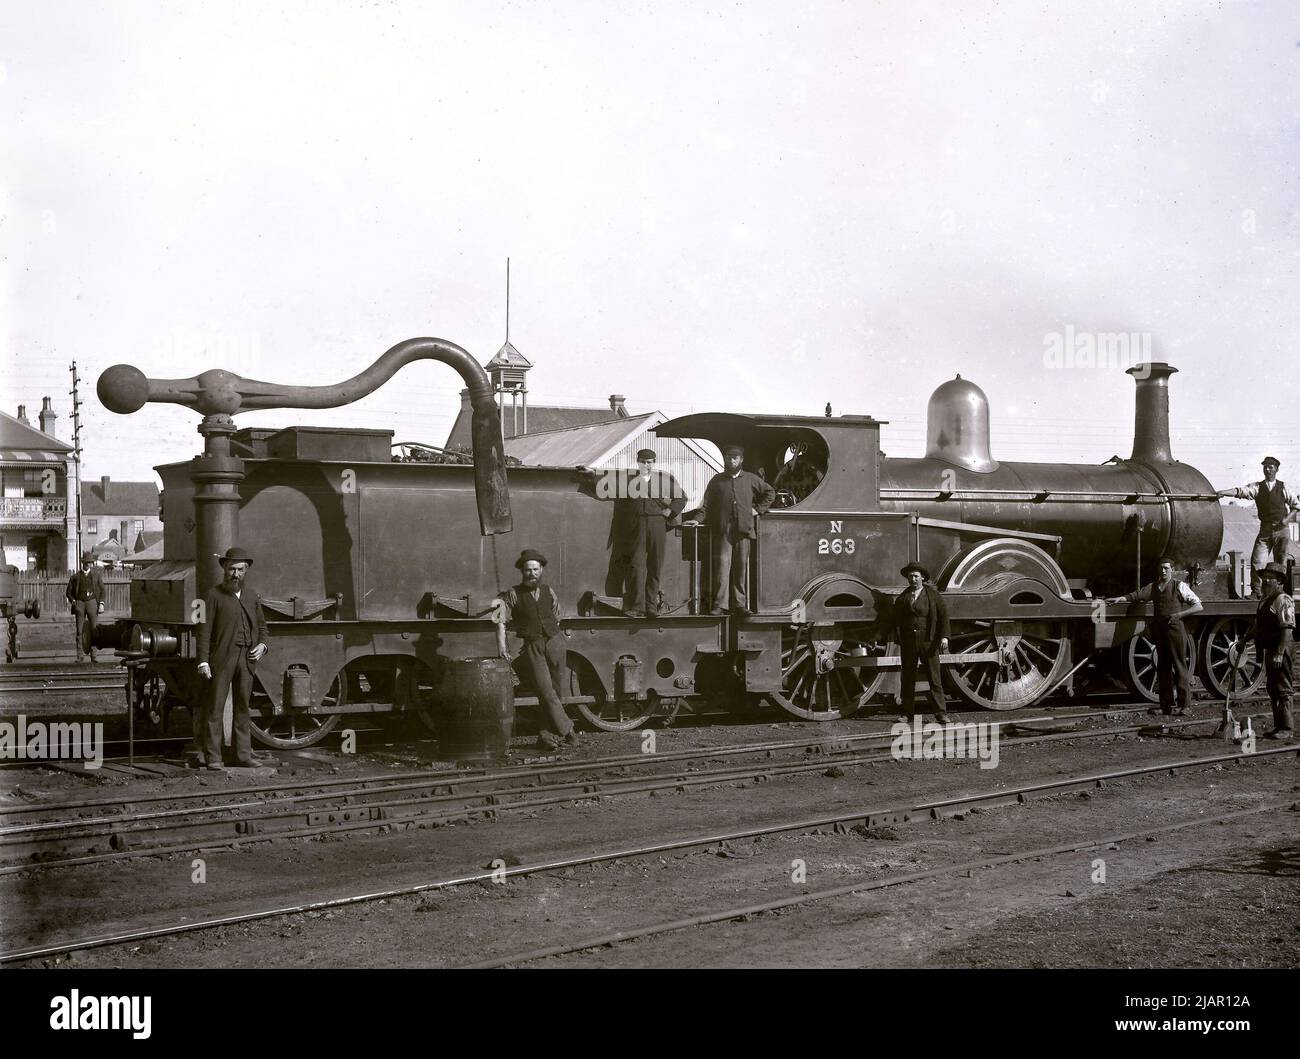 The locomotive, No N263, is one of the D(261) class 4-4-0 express passenger locomotives of which 24 were built by Dubs & Co of Glasgow ca. 1883-1889 Stock Photo